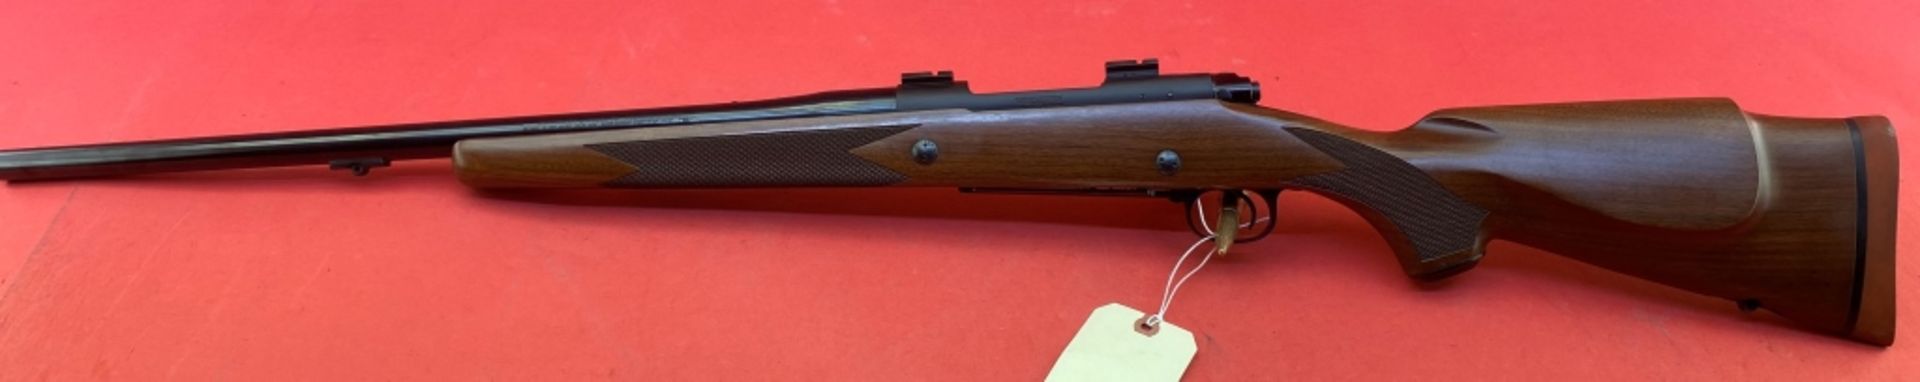 Winchester 70 .458 Mag Rifle - Image 13 of 13